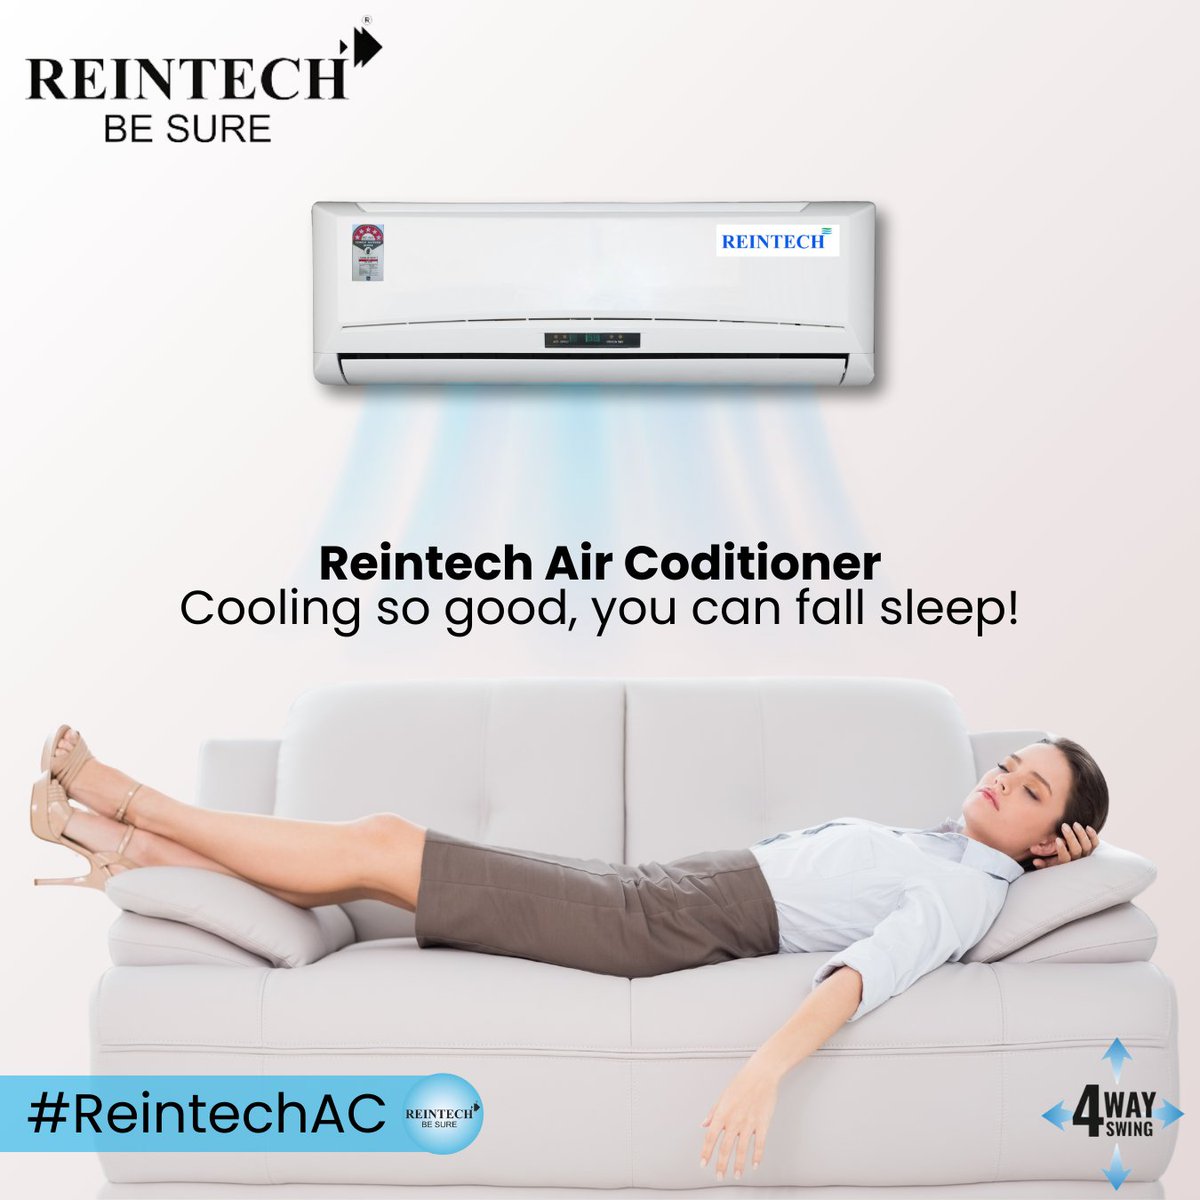 🔥 Say goodbye to summer nights with the Reintech Air Conditioner! ❄️ You'll never want to leave your cool, cozy bed. 😴 

#ReintechAC #CoolingGoals #BeatTheHeat #SleepWell #SummerNights #TooCoolToBeTrue #Reintech #ACs #heatingandcooling #smarthome #madeinindia